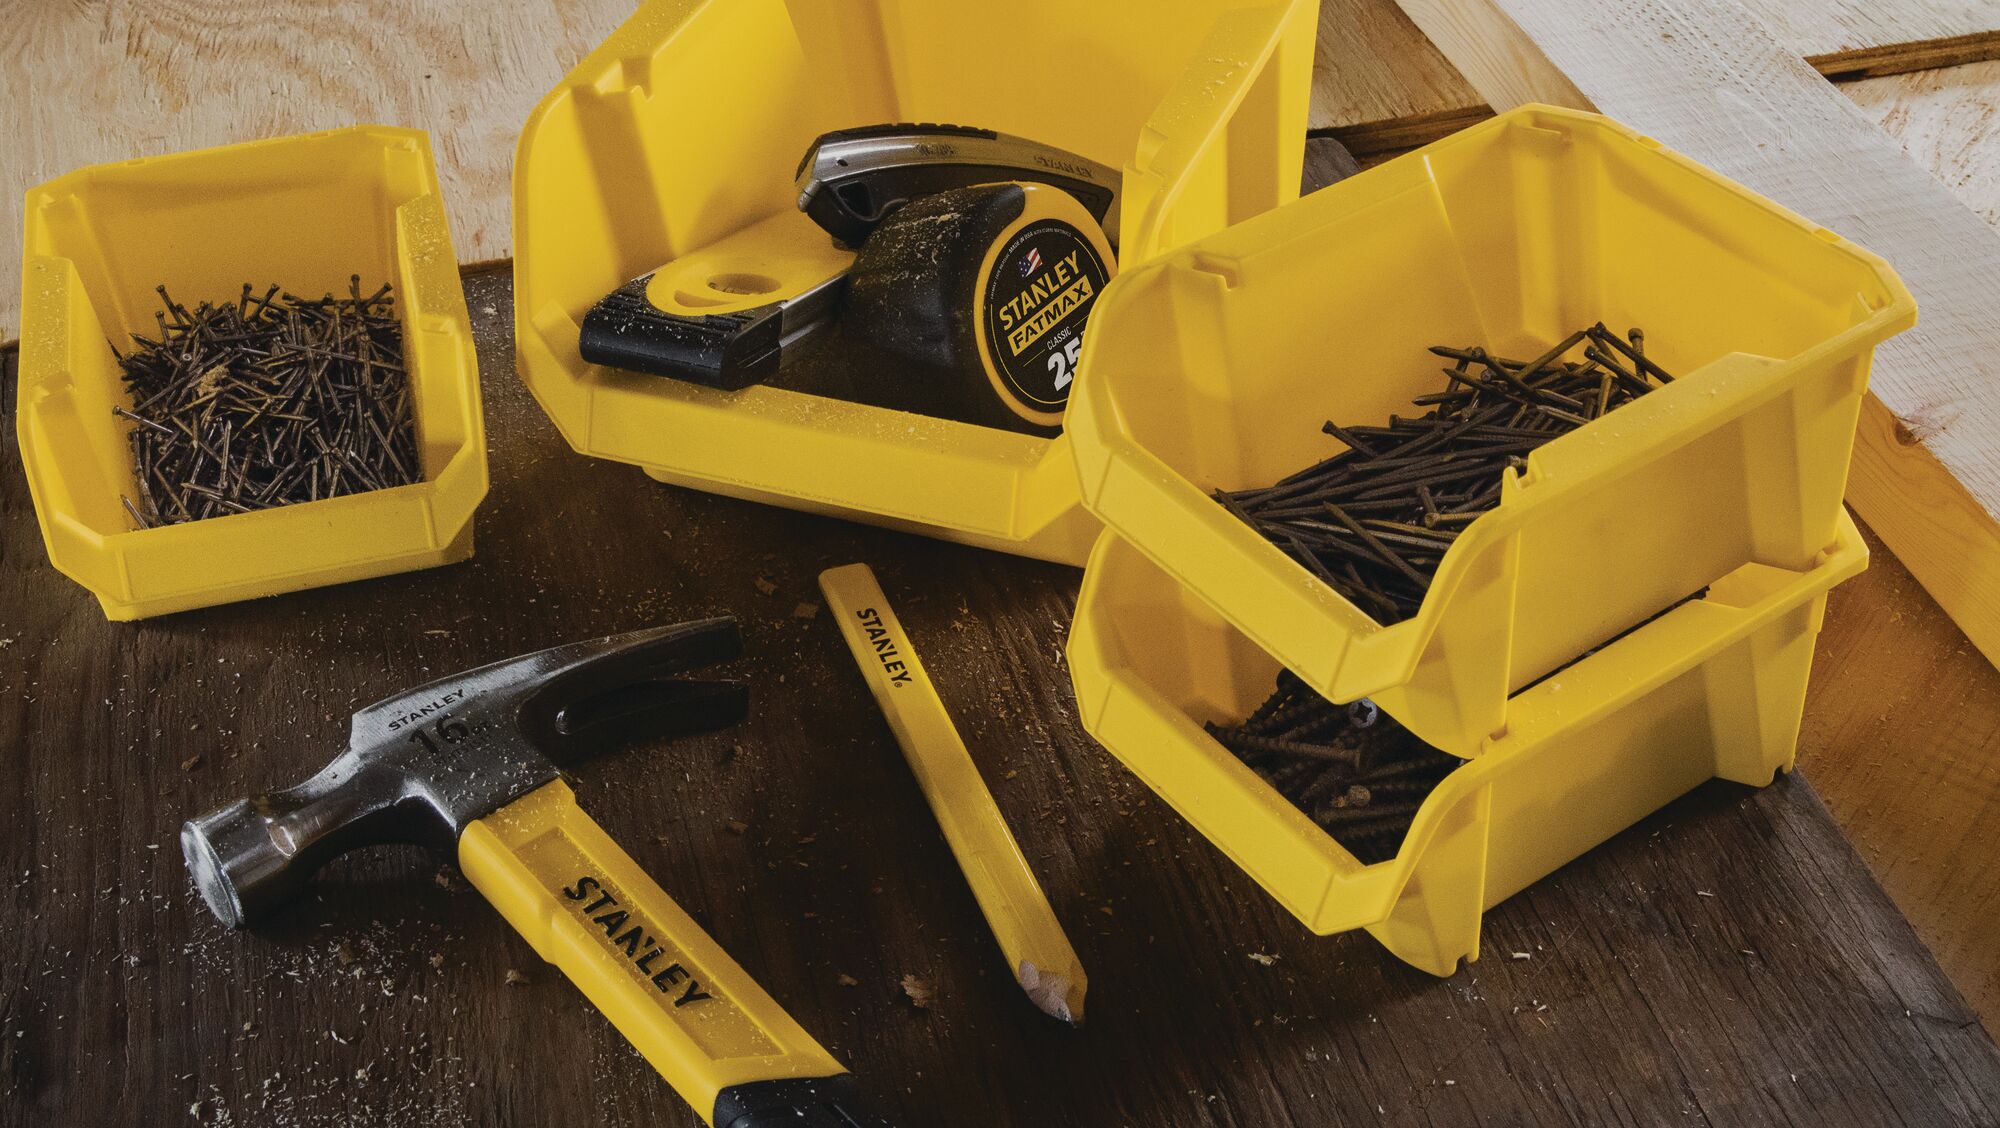 Stanley tools and nails set.